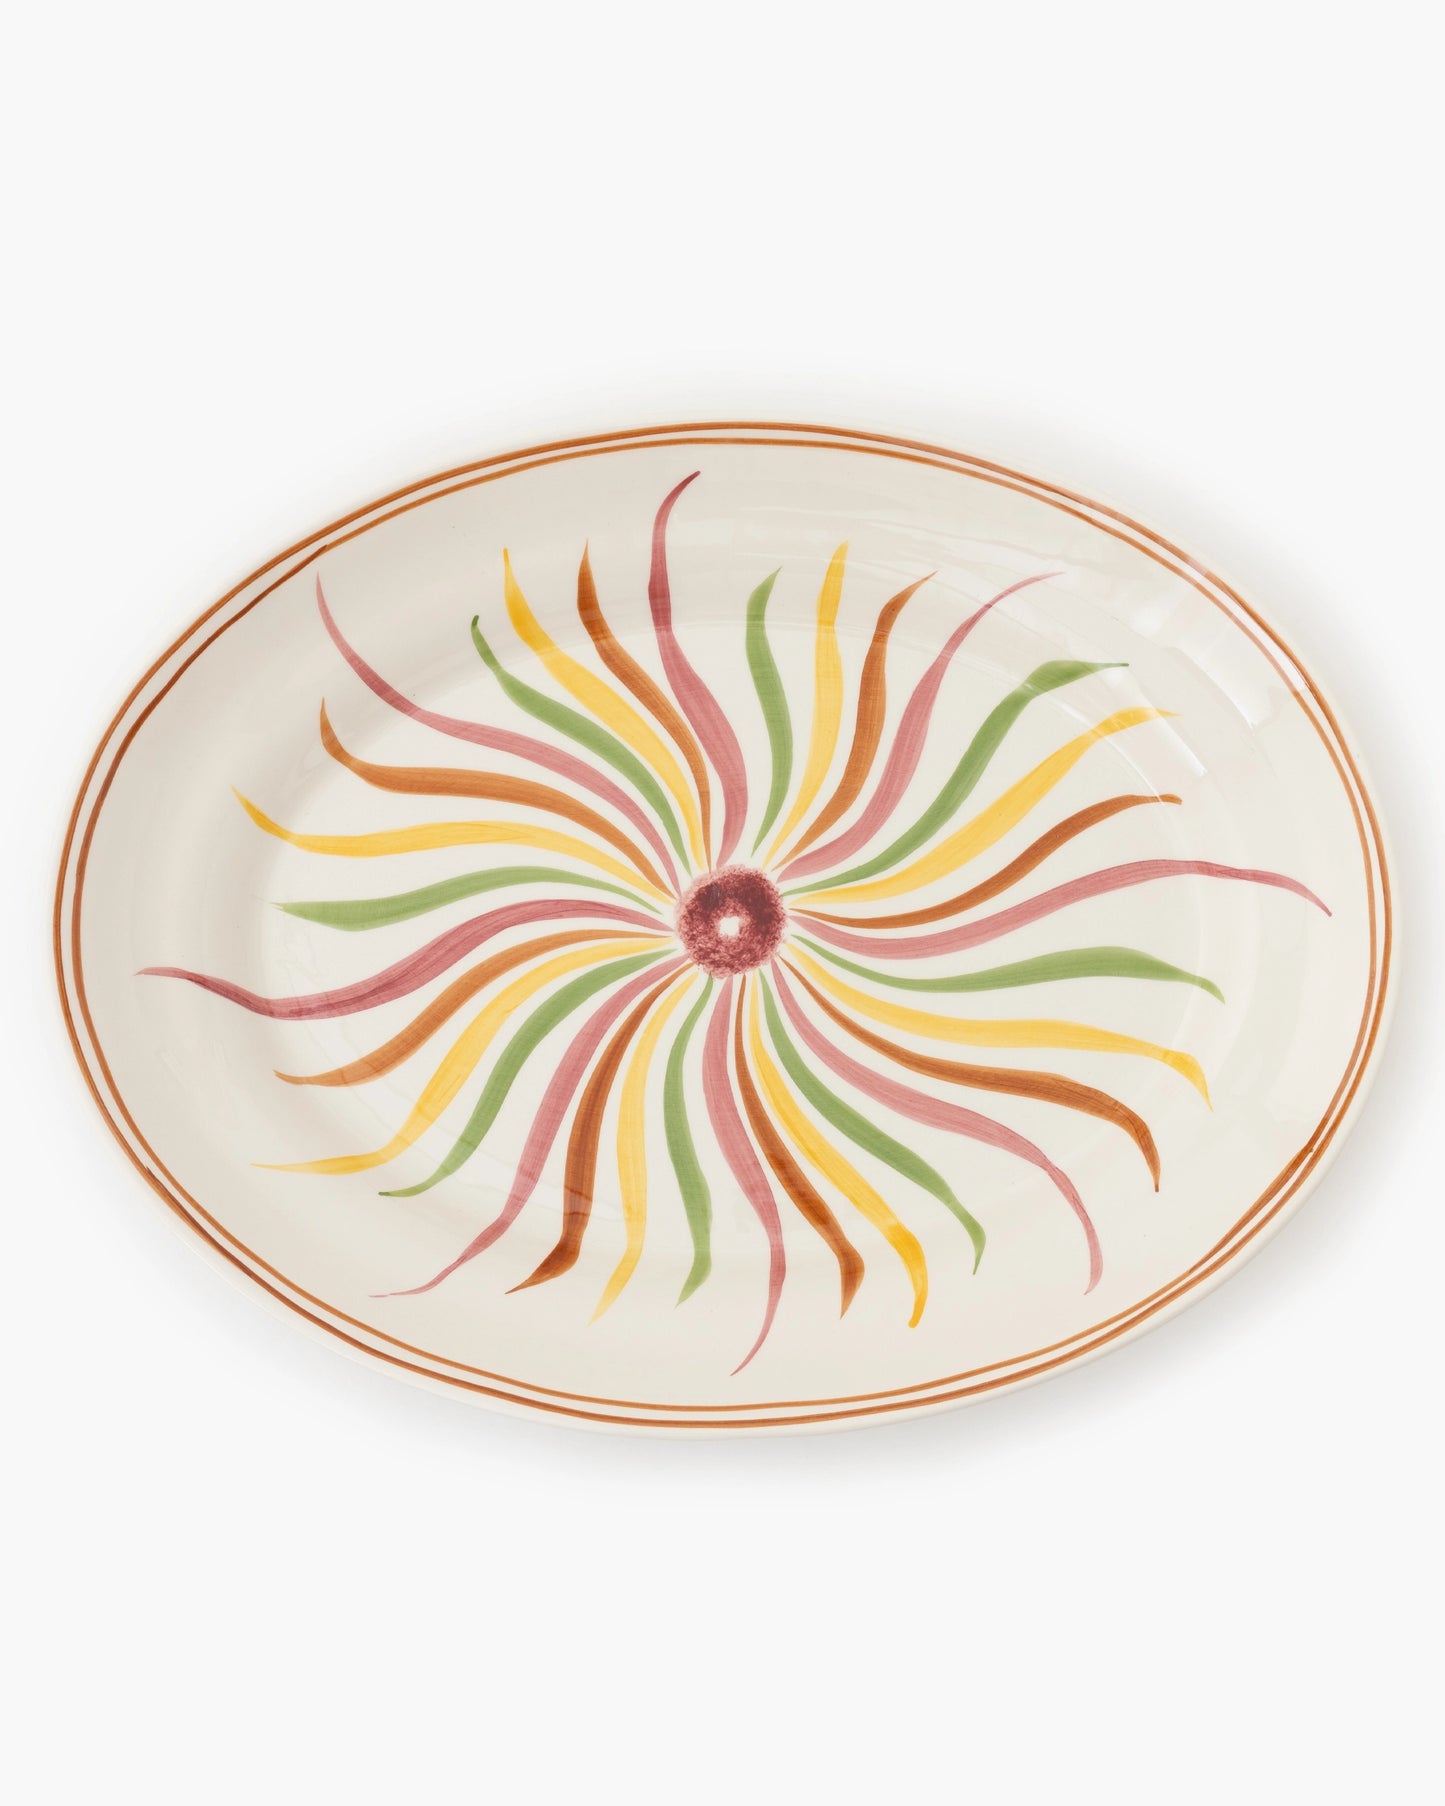 Cosmos Oval Serving Platter